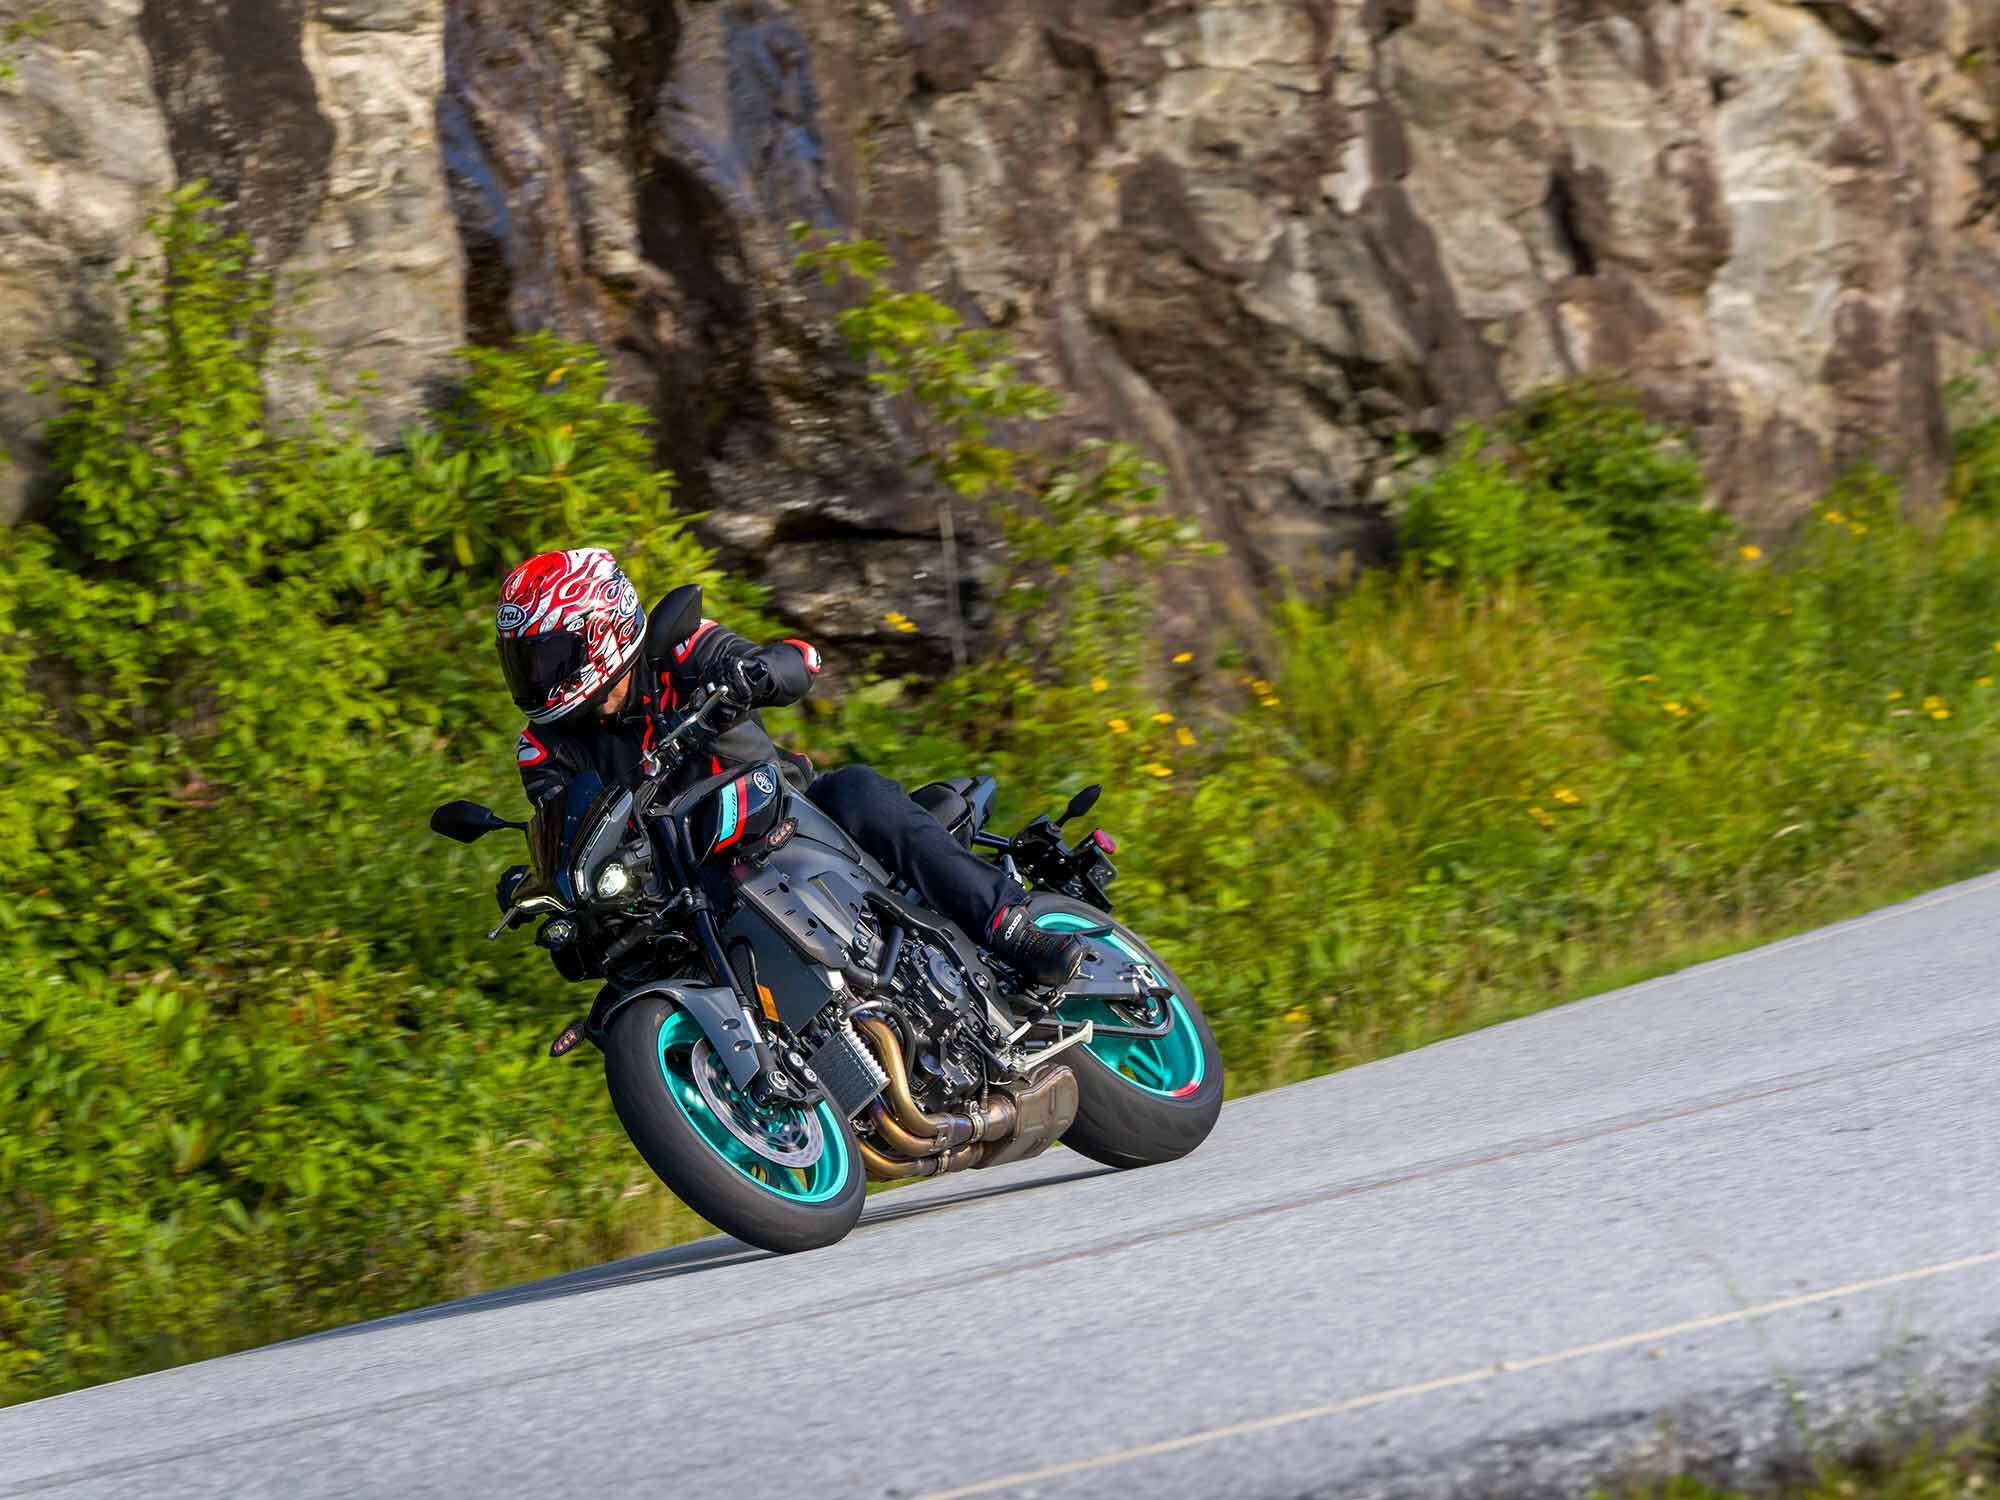 A capable chassis and exciting engine character combine to make the MT-10 a lot of fun to ride in the twisties.